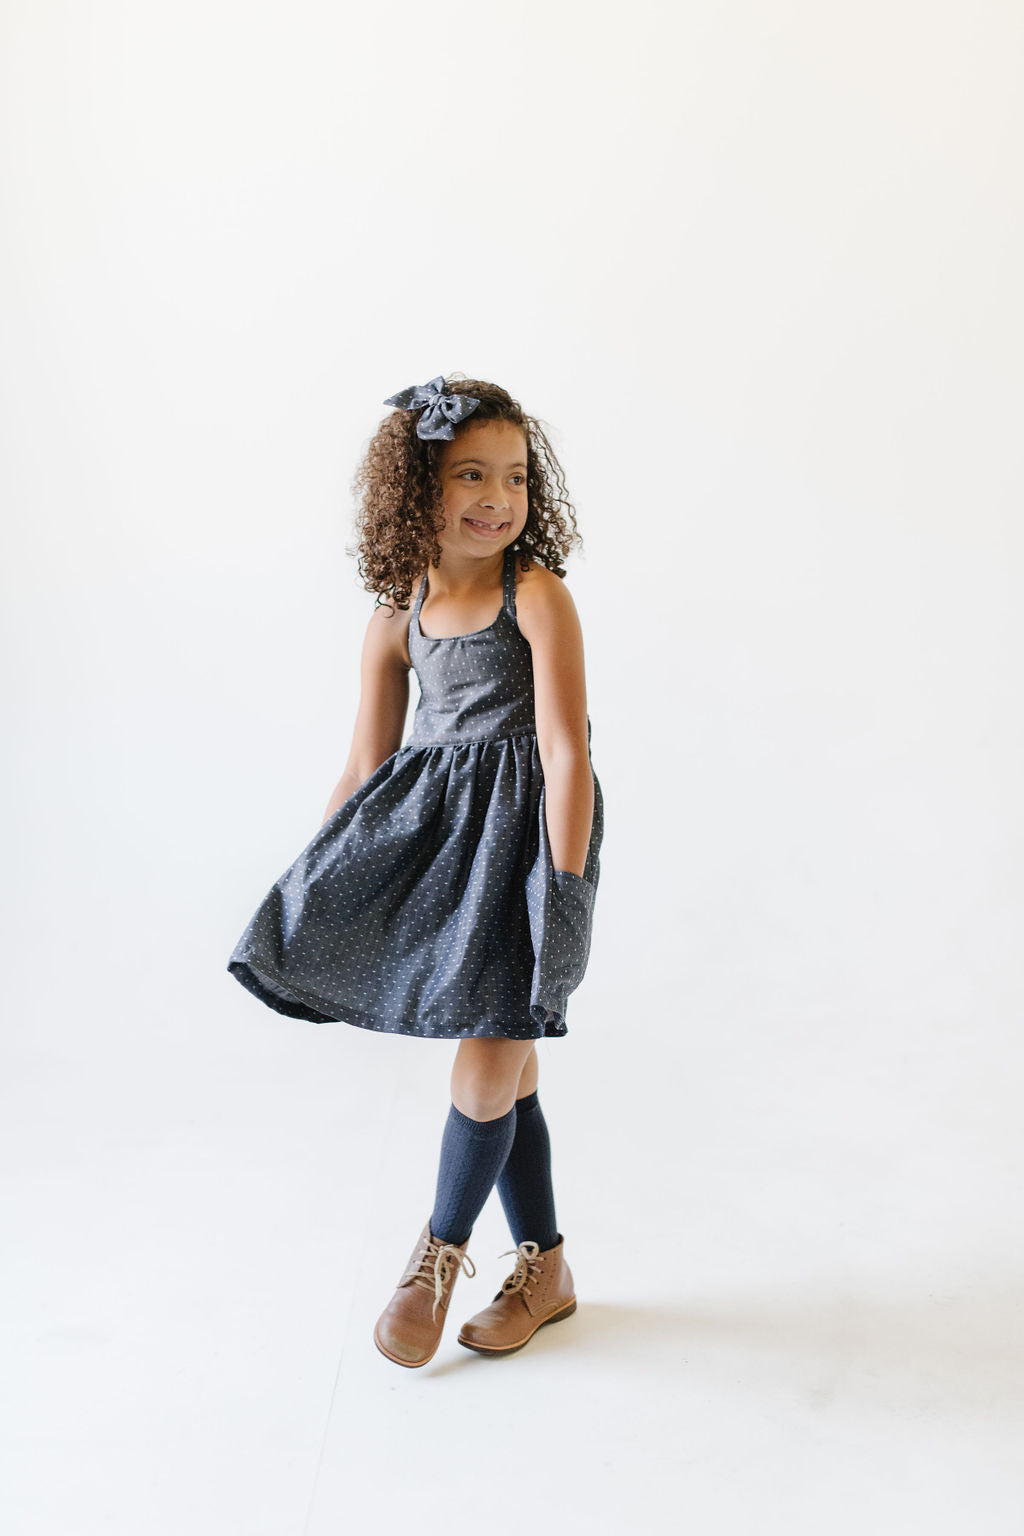 Freya Dress with Market Pockets in 'Reclaimed Taupe Windowpane' - Ready To Ship